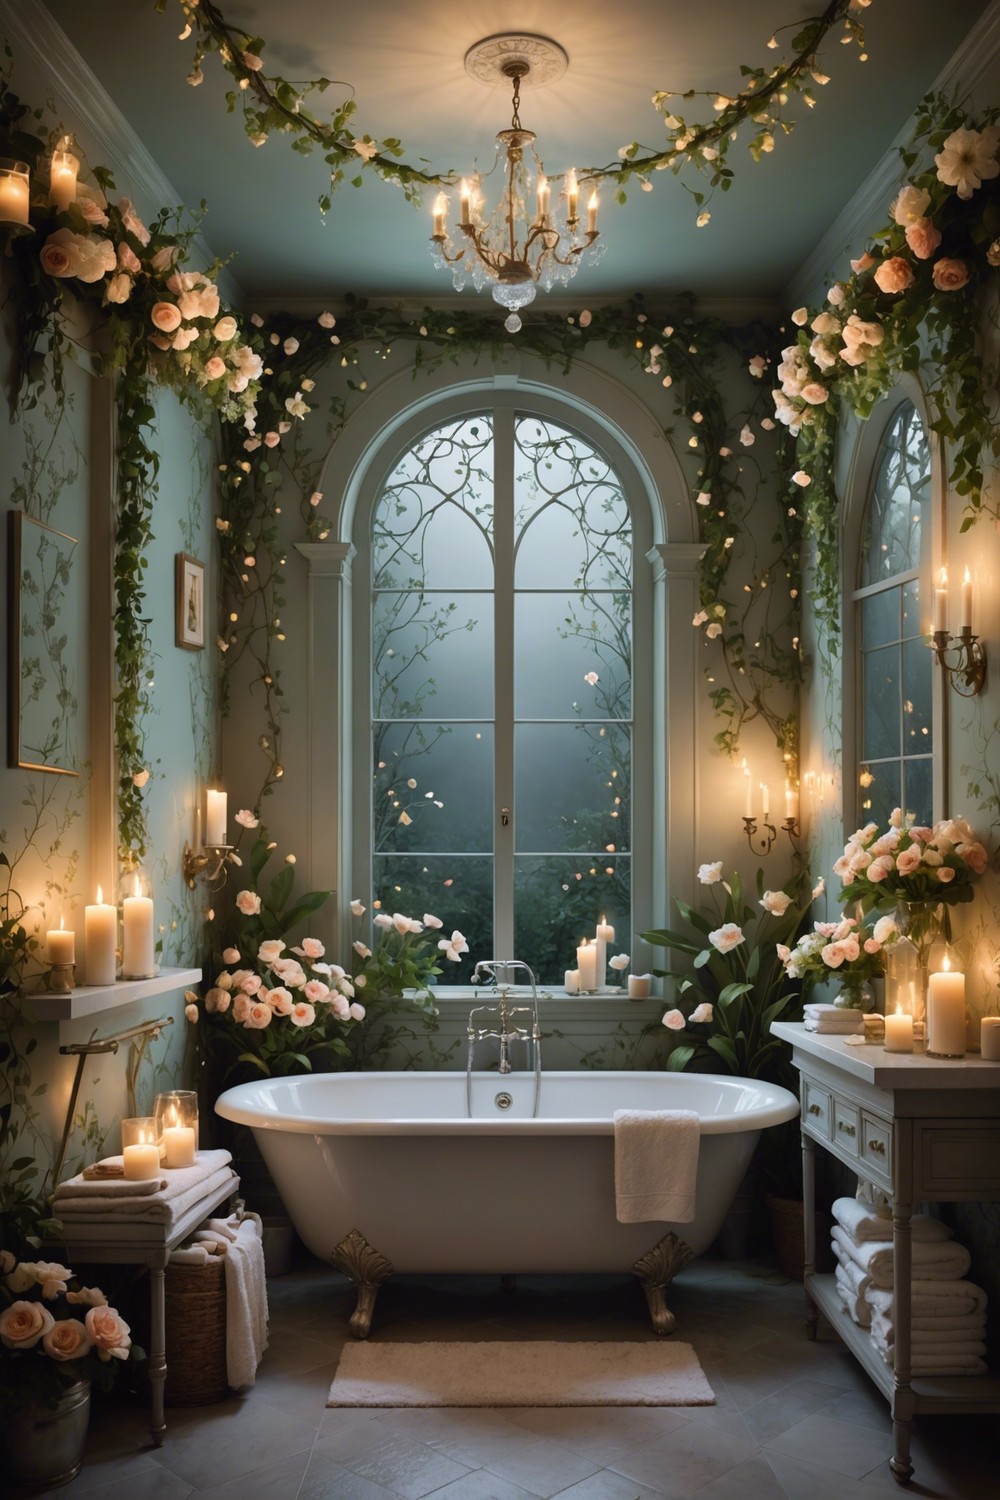 Glowing Garden: Luminous Floral Patterns for a Dreamy Bathroom